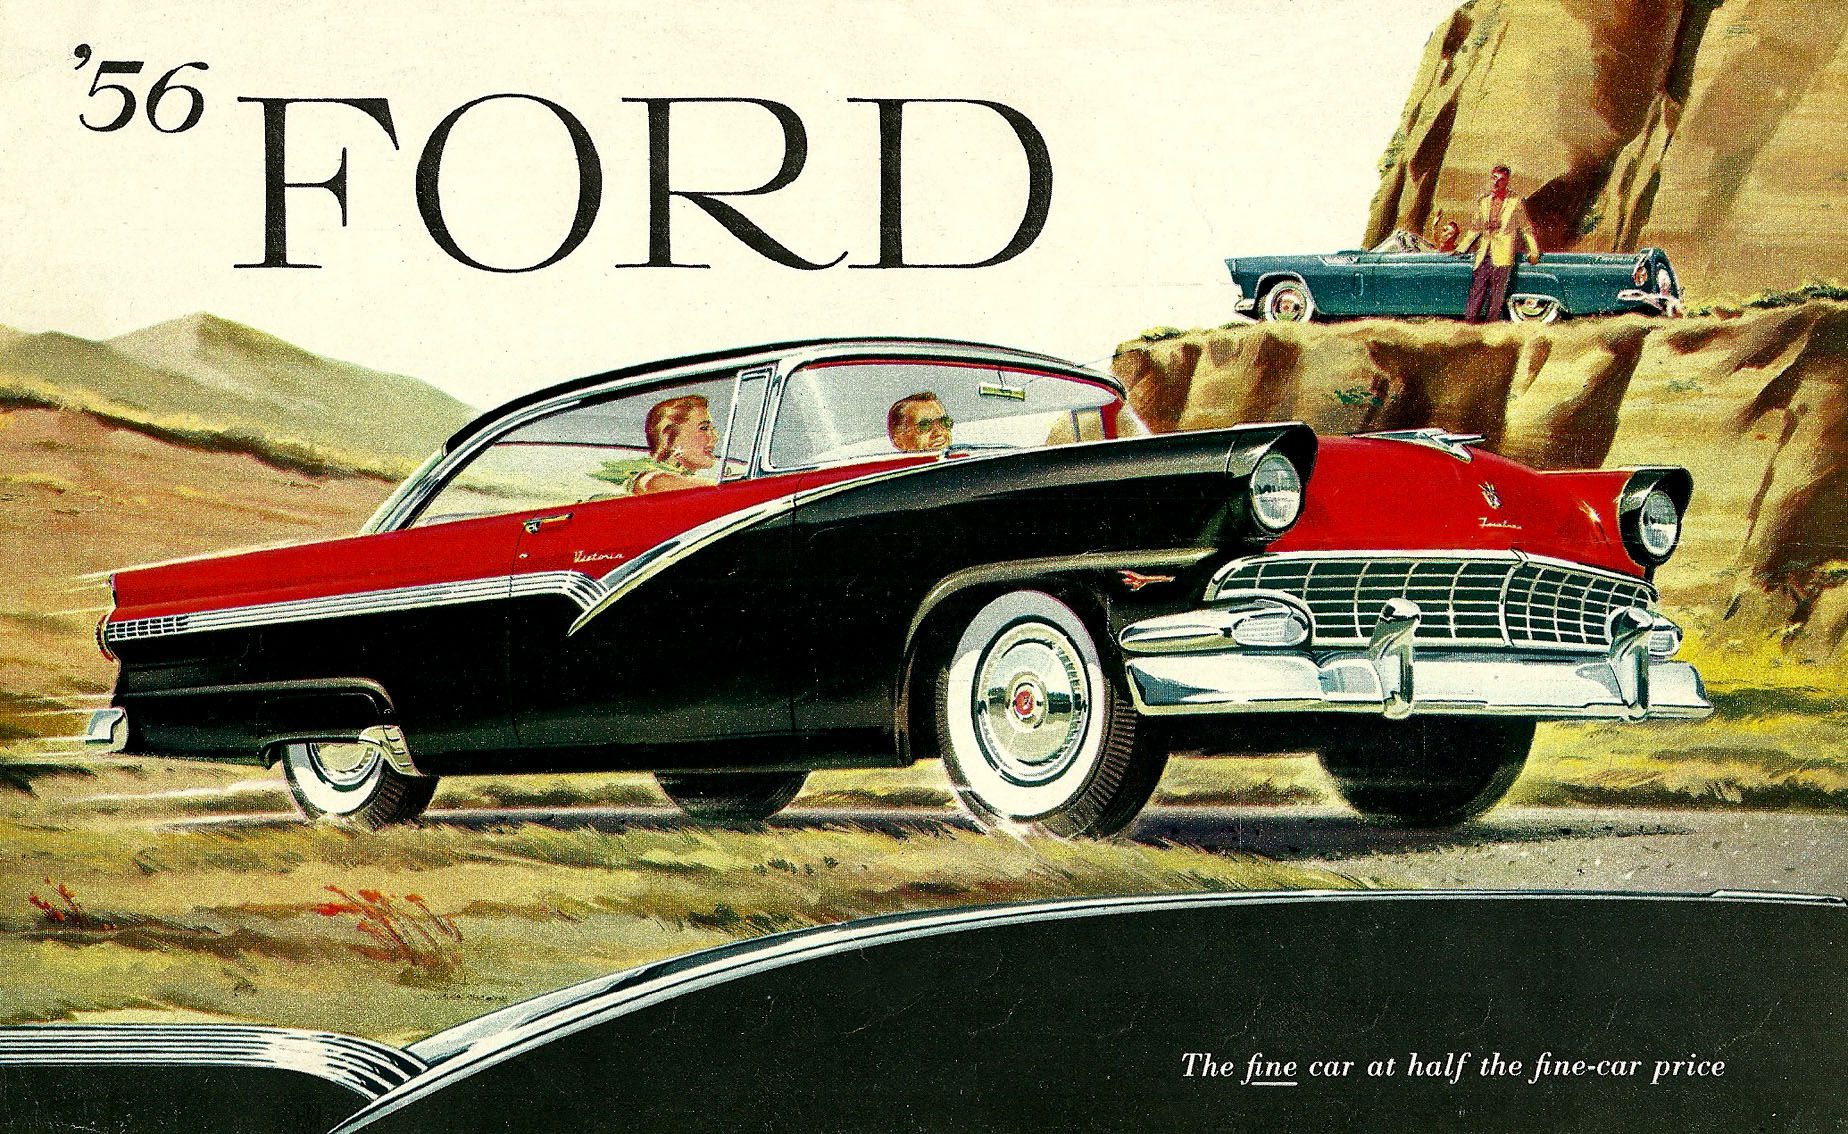 1956_Ford_Foldout-01